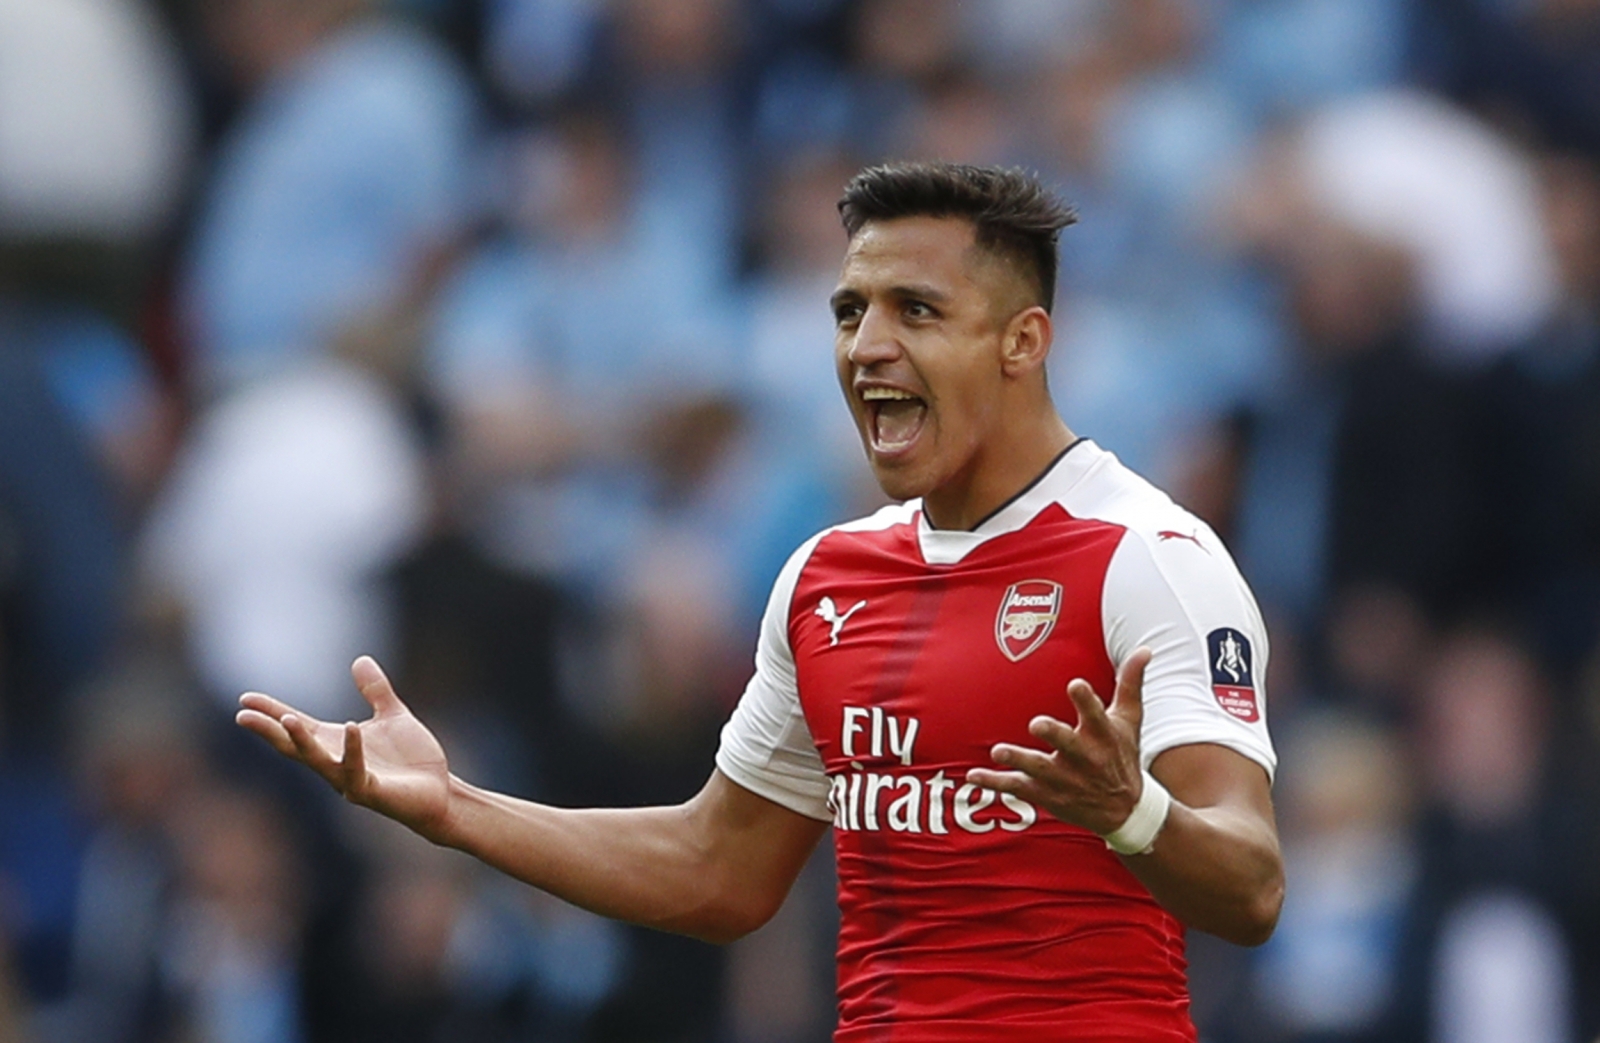 Arsene Wenger defends Alexis Sanchez amid accusations of simulation against Leicester City